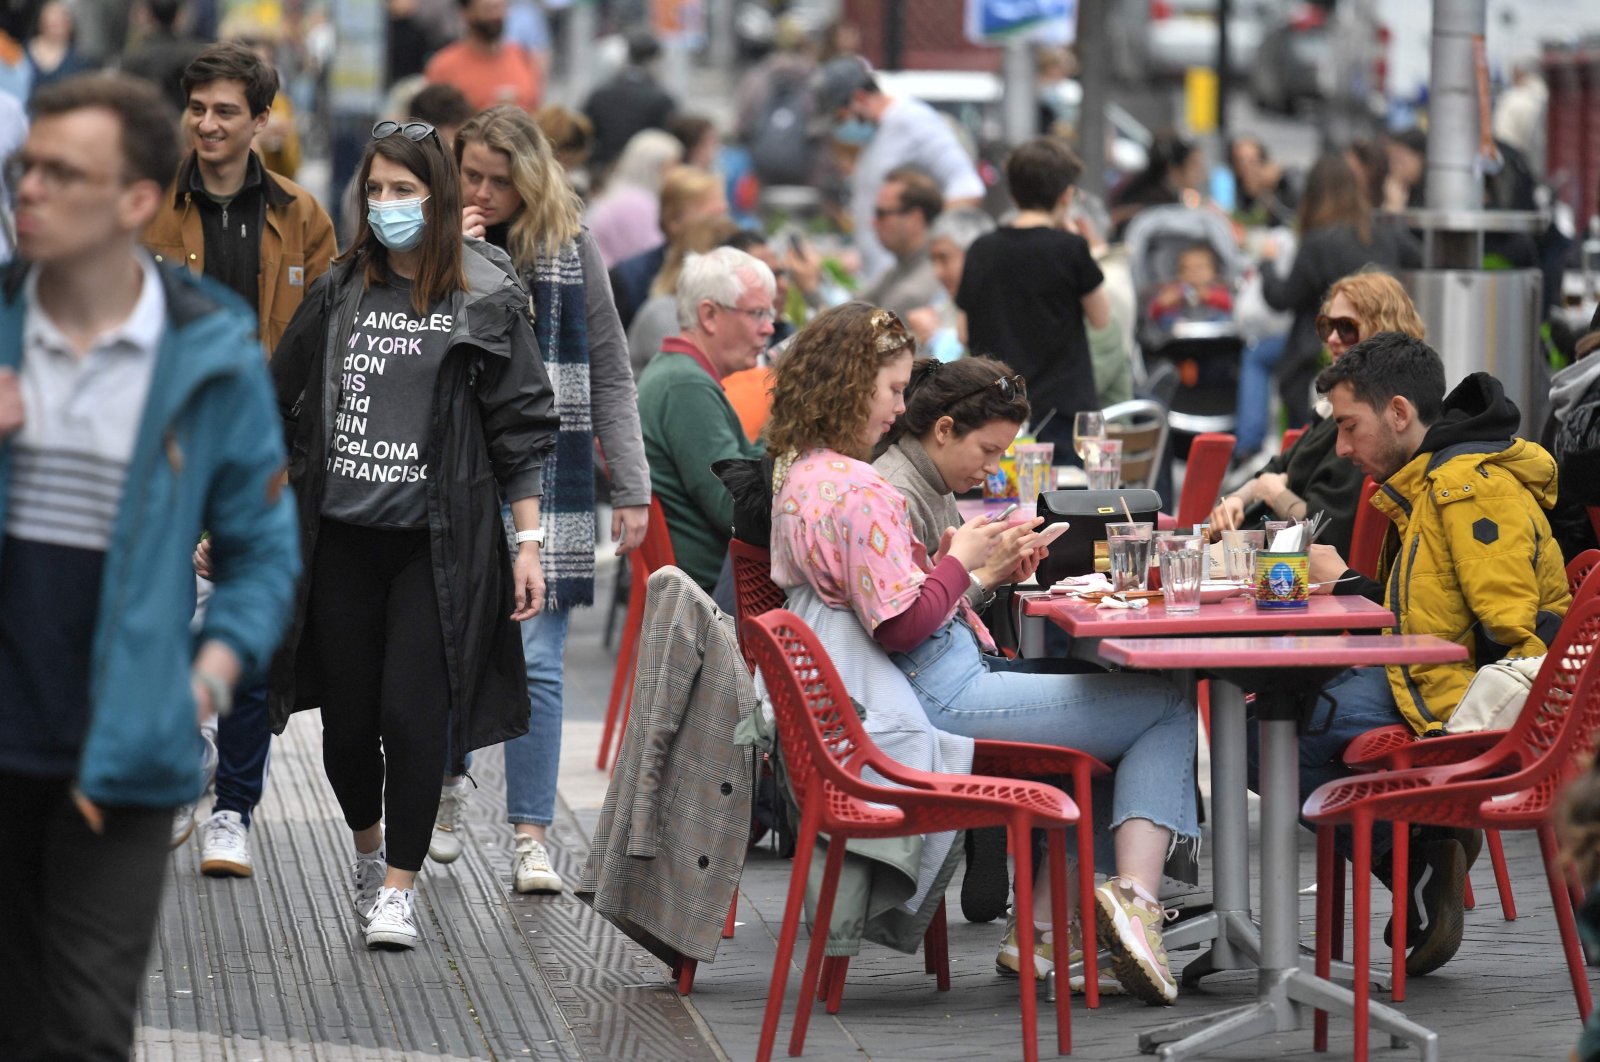 Members of the public enjoy refreshments at tables set up outside a cafe in south Kensington, London, U.K., May 18, 2021. (AFP Photo)